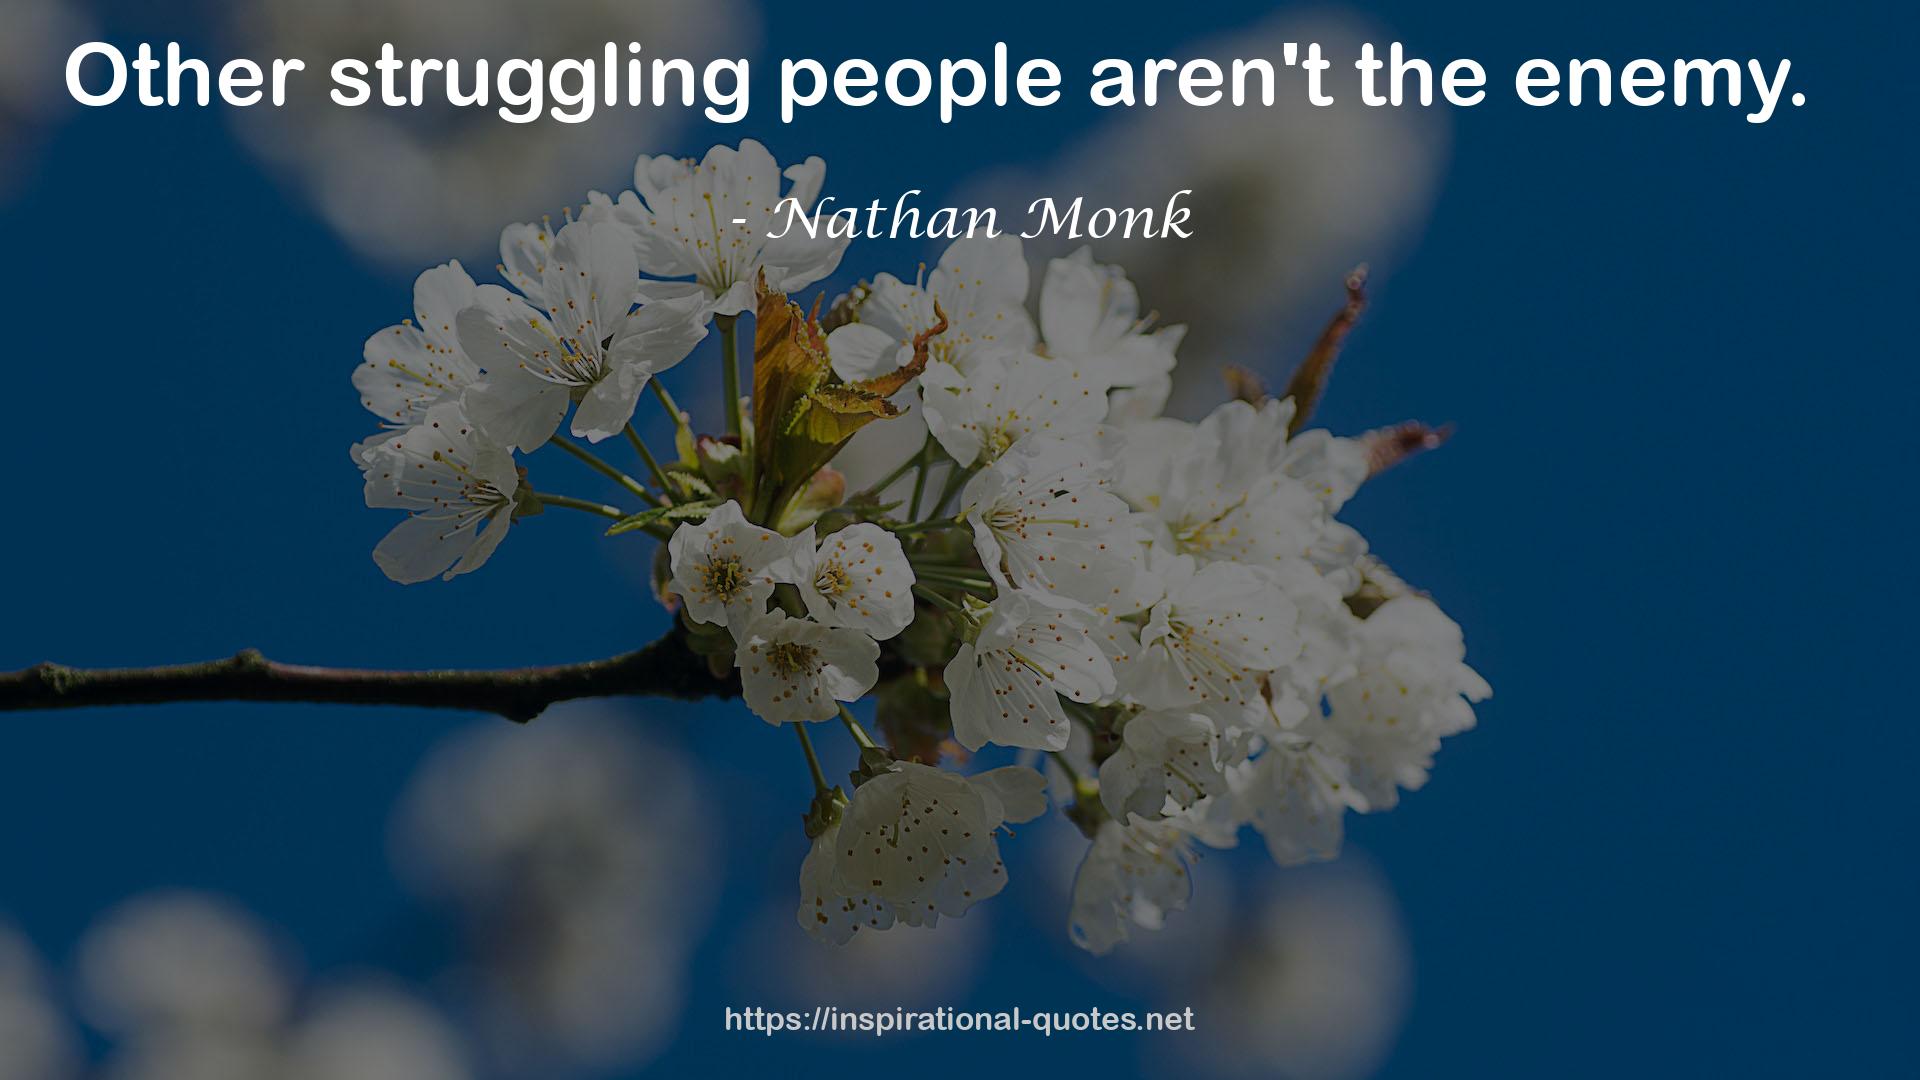 Nathan Monk QUOTES